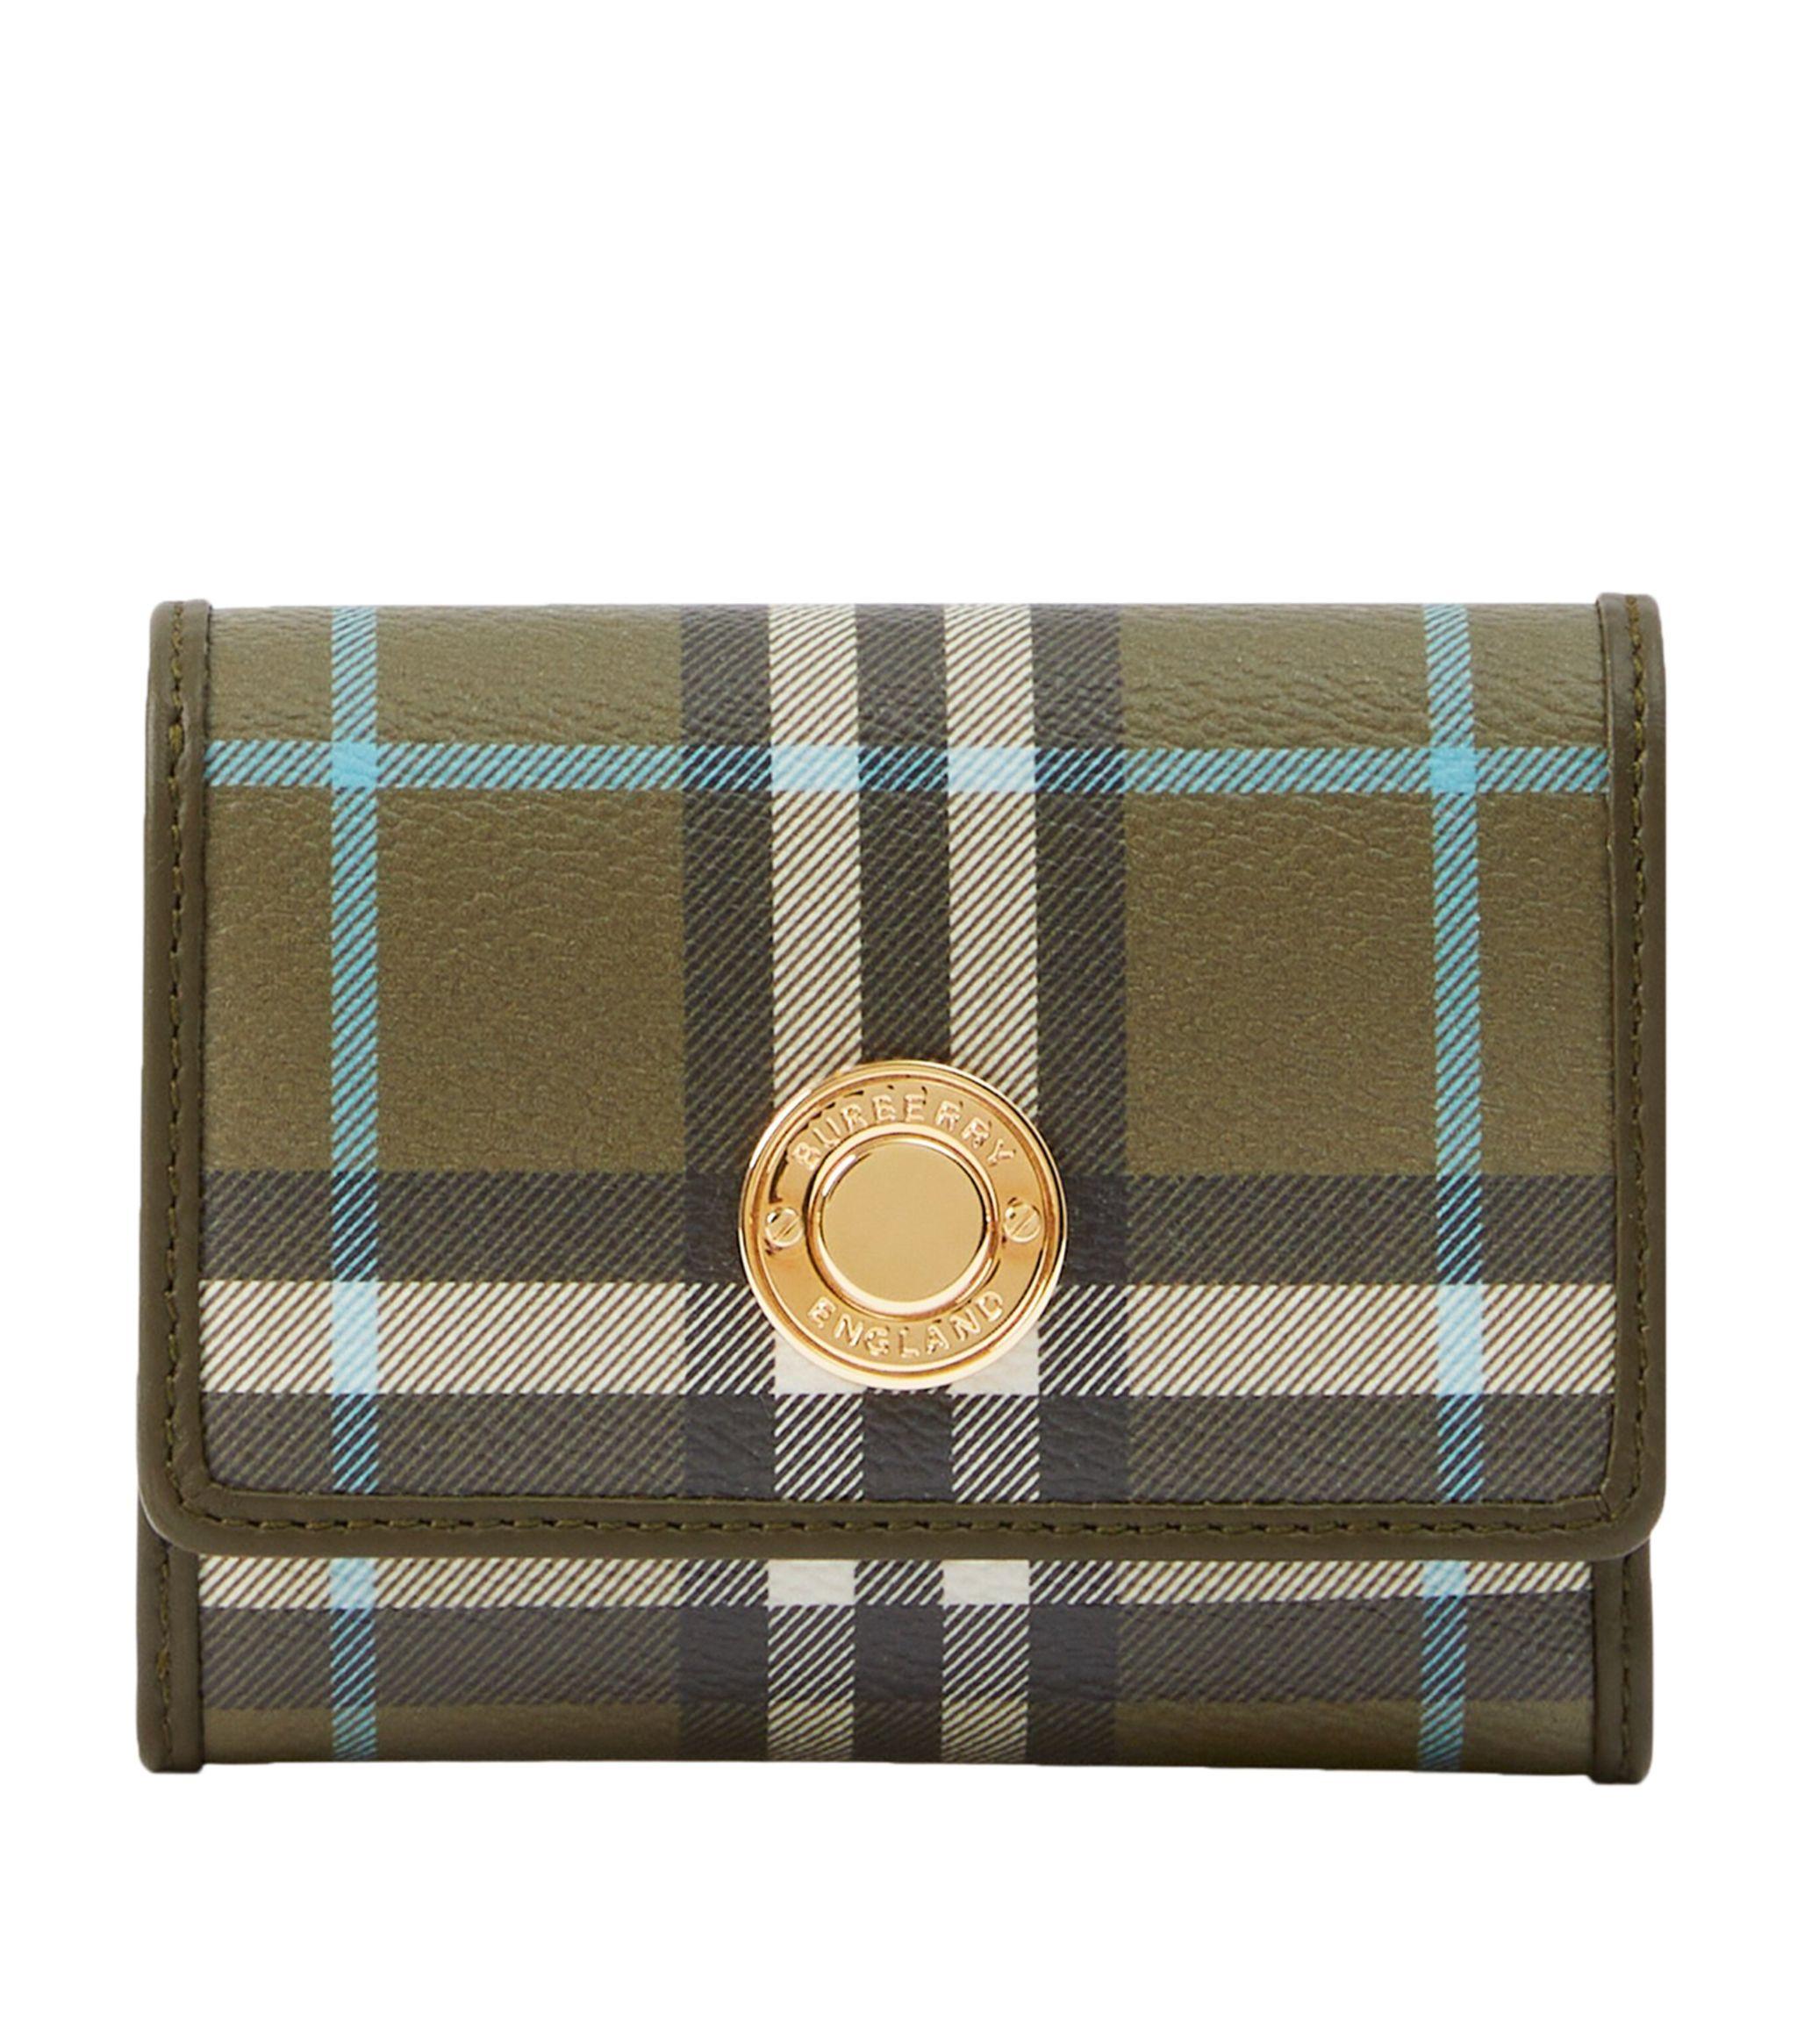 Burberry Vintage-Check Leather Wallet